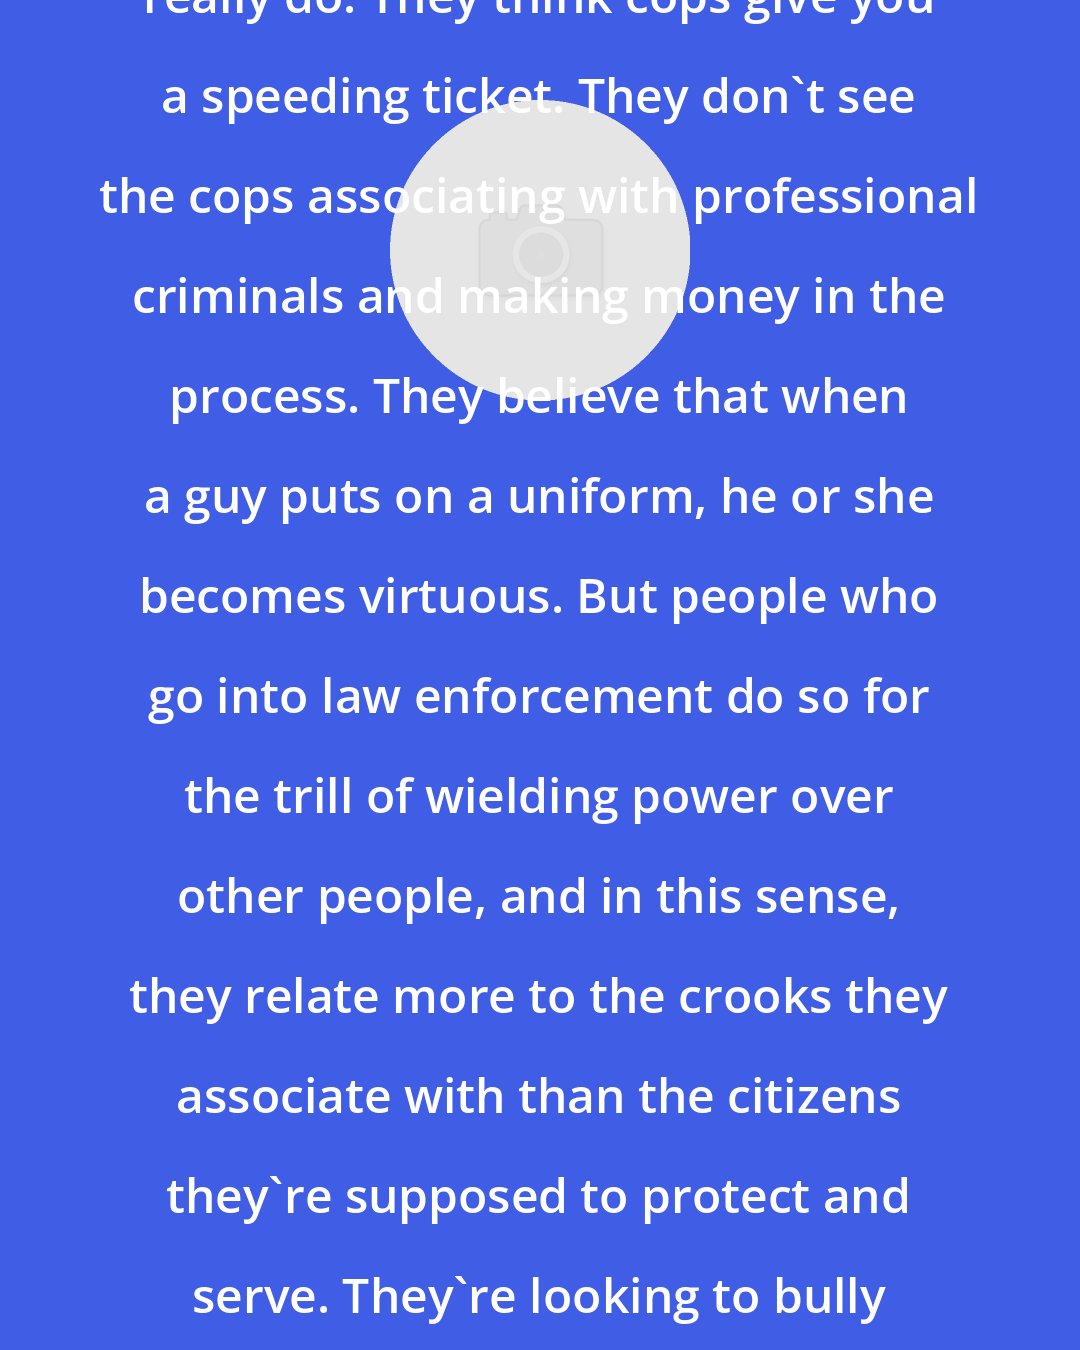 Douglas Valentine: Most people have no idea what cops really do. They think cops give you a speeding ticket. They don't see the cops associating with professional criminals and making money in the process. They believe that when a guy puts on a uniform, he or she becomes virtuous. But people who go into law enforcement do so for the trill of wielding power over other people, and in this sense, they relate more to the crooks they associate with than the citizens they're supposed to protect and serve. They're looking to bully someone and they're corrupt. That's law enforcement.